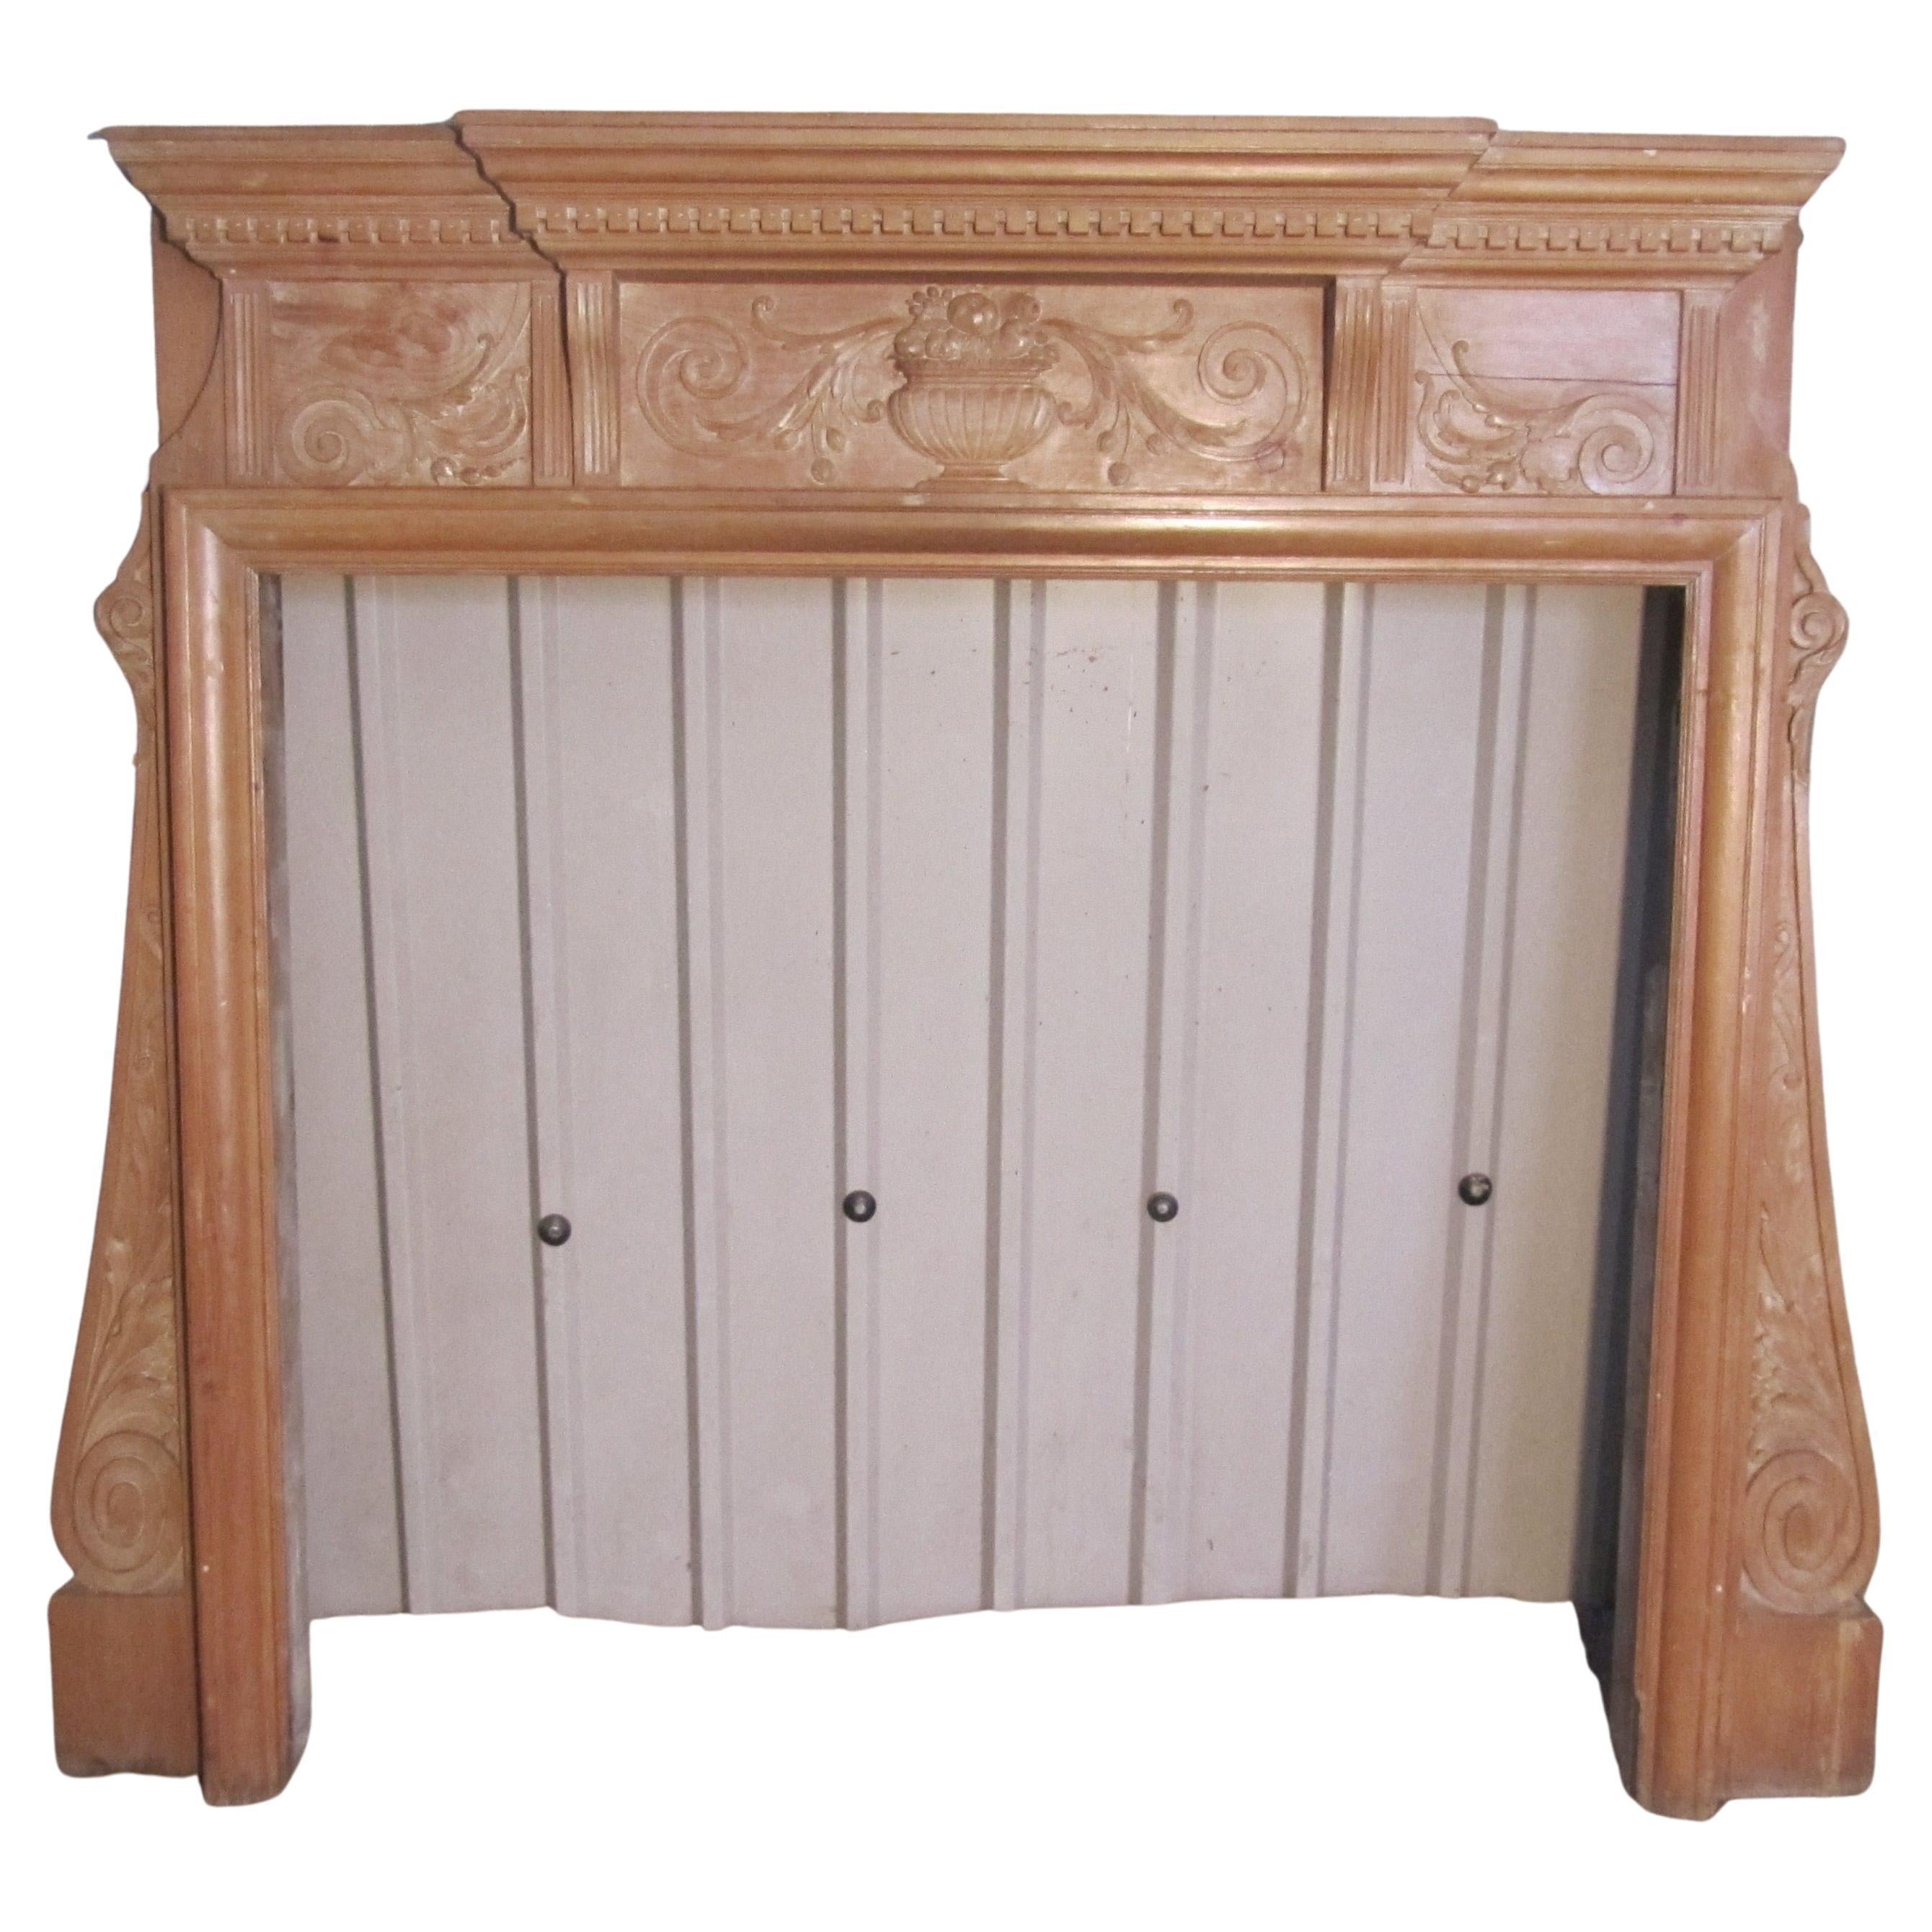 Large Decorative Victorian Pine Fireplace For Sale